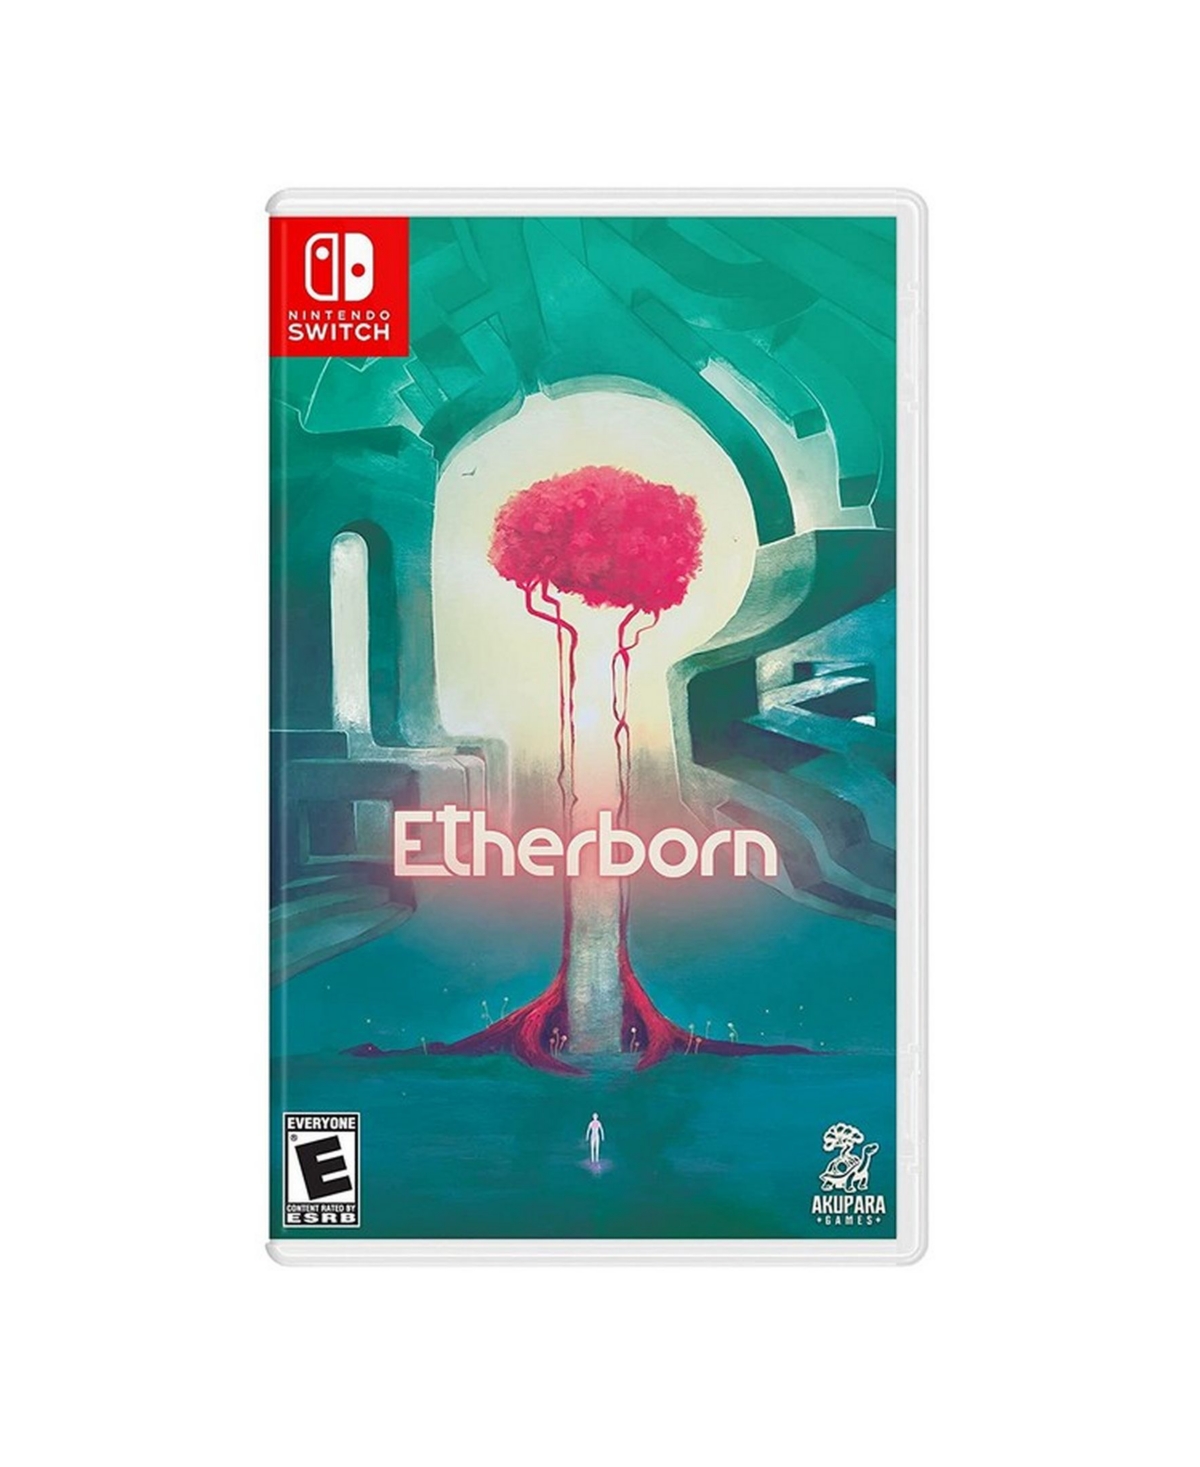 Nintendo Etherborn [physical Standard Edition] - Switch